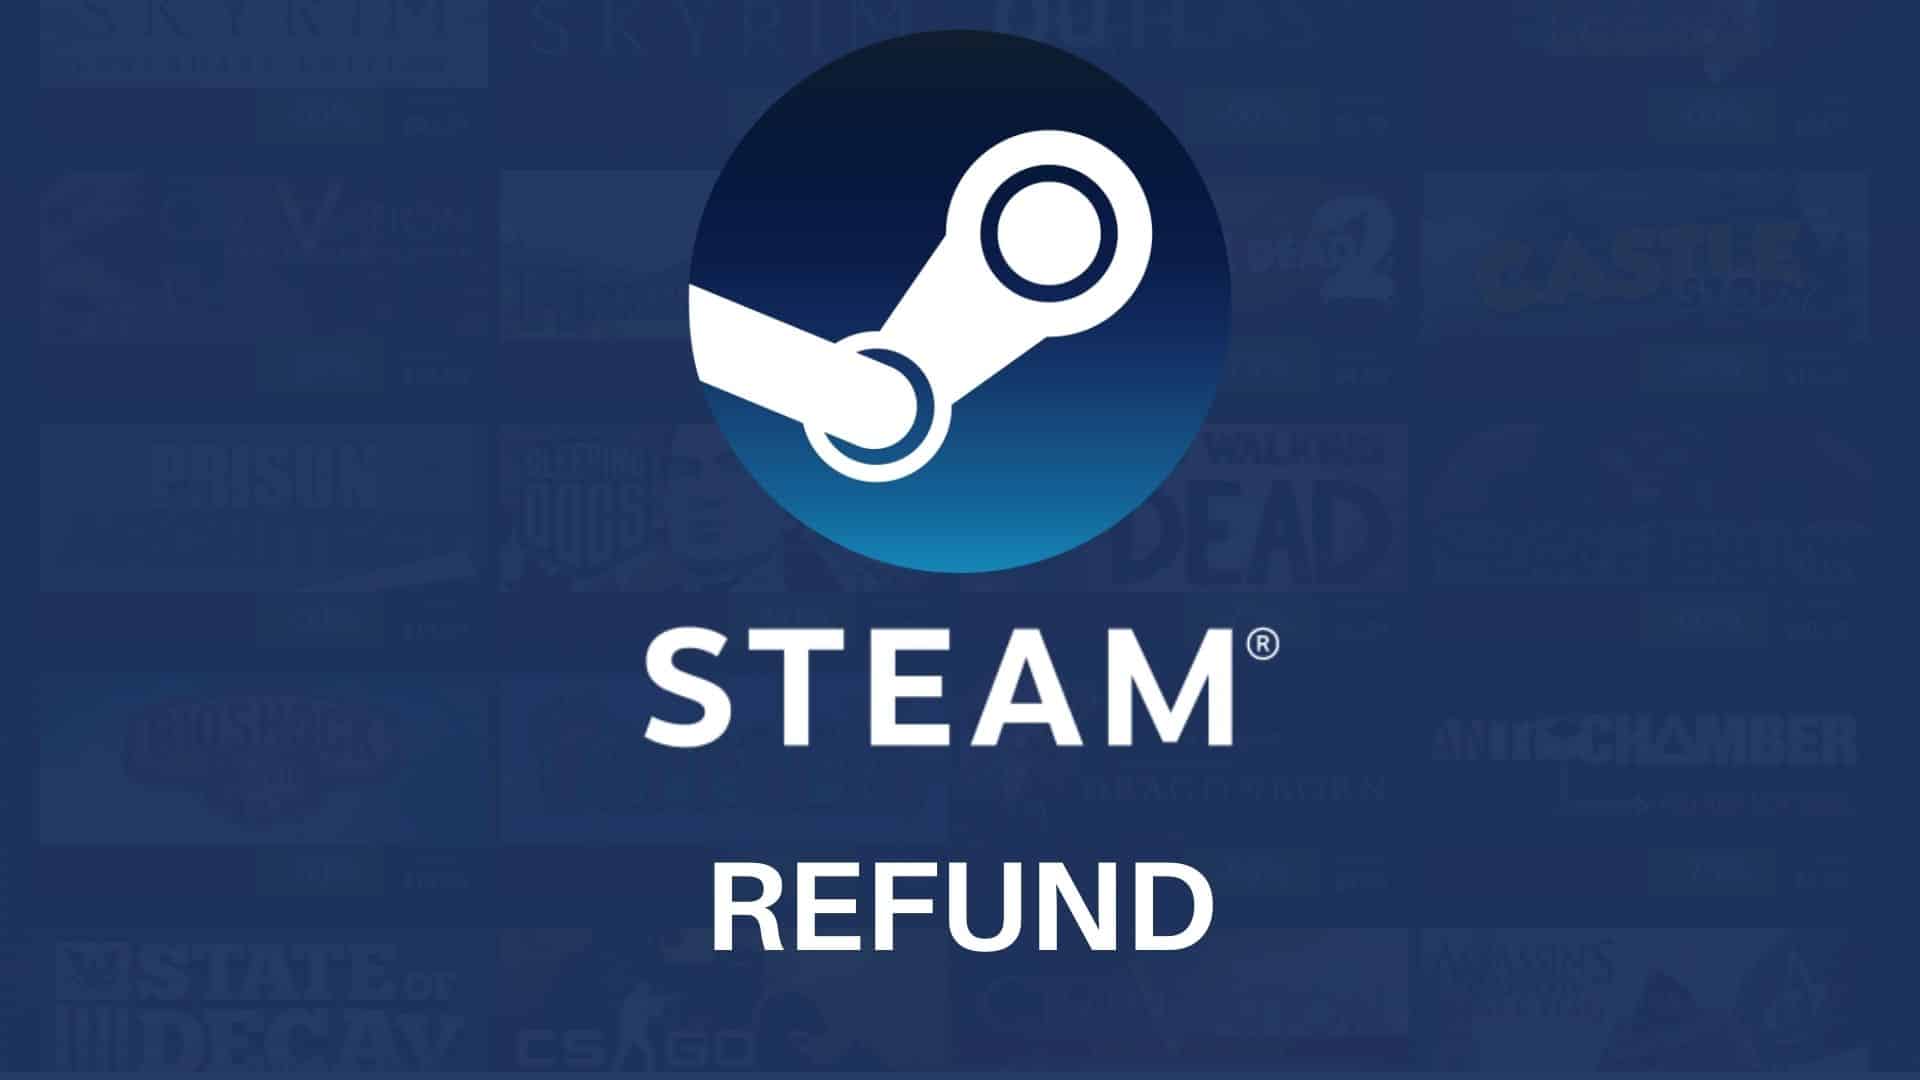 An image of the Steam logo with the words 'refund' below it on a blue background